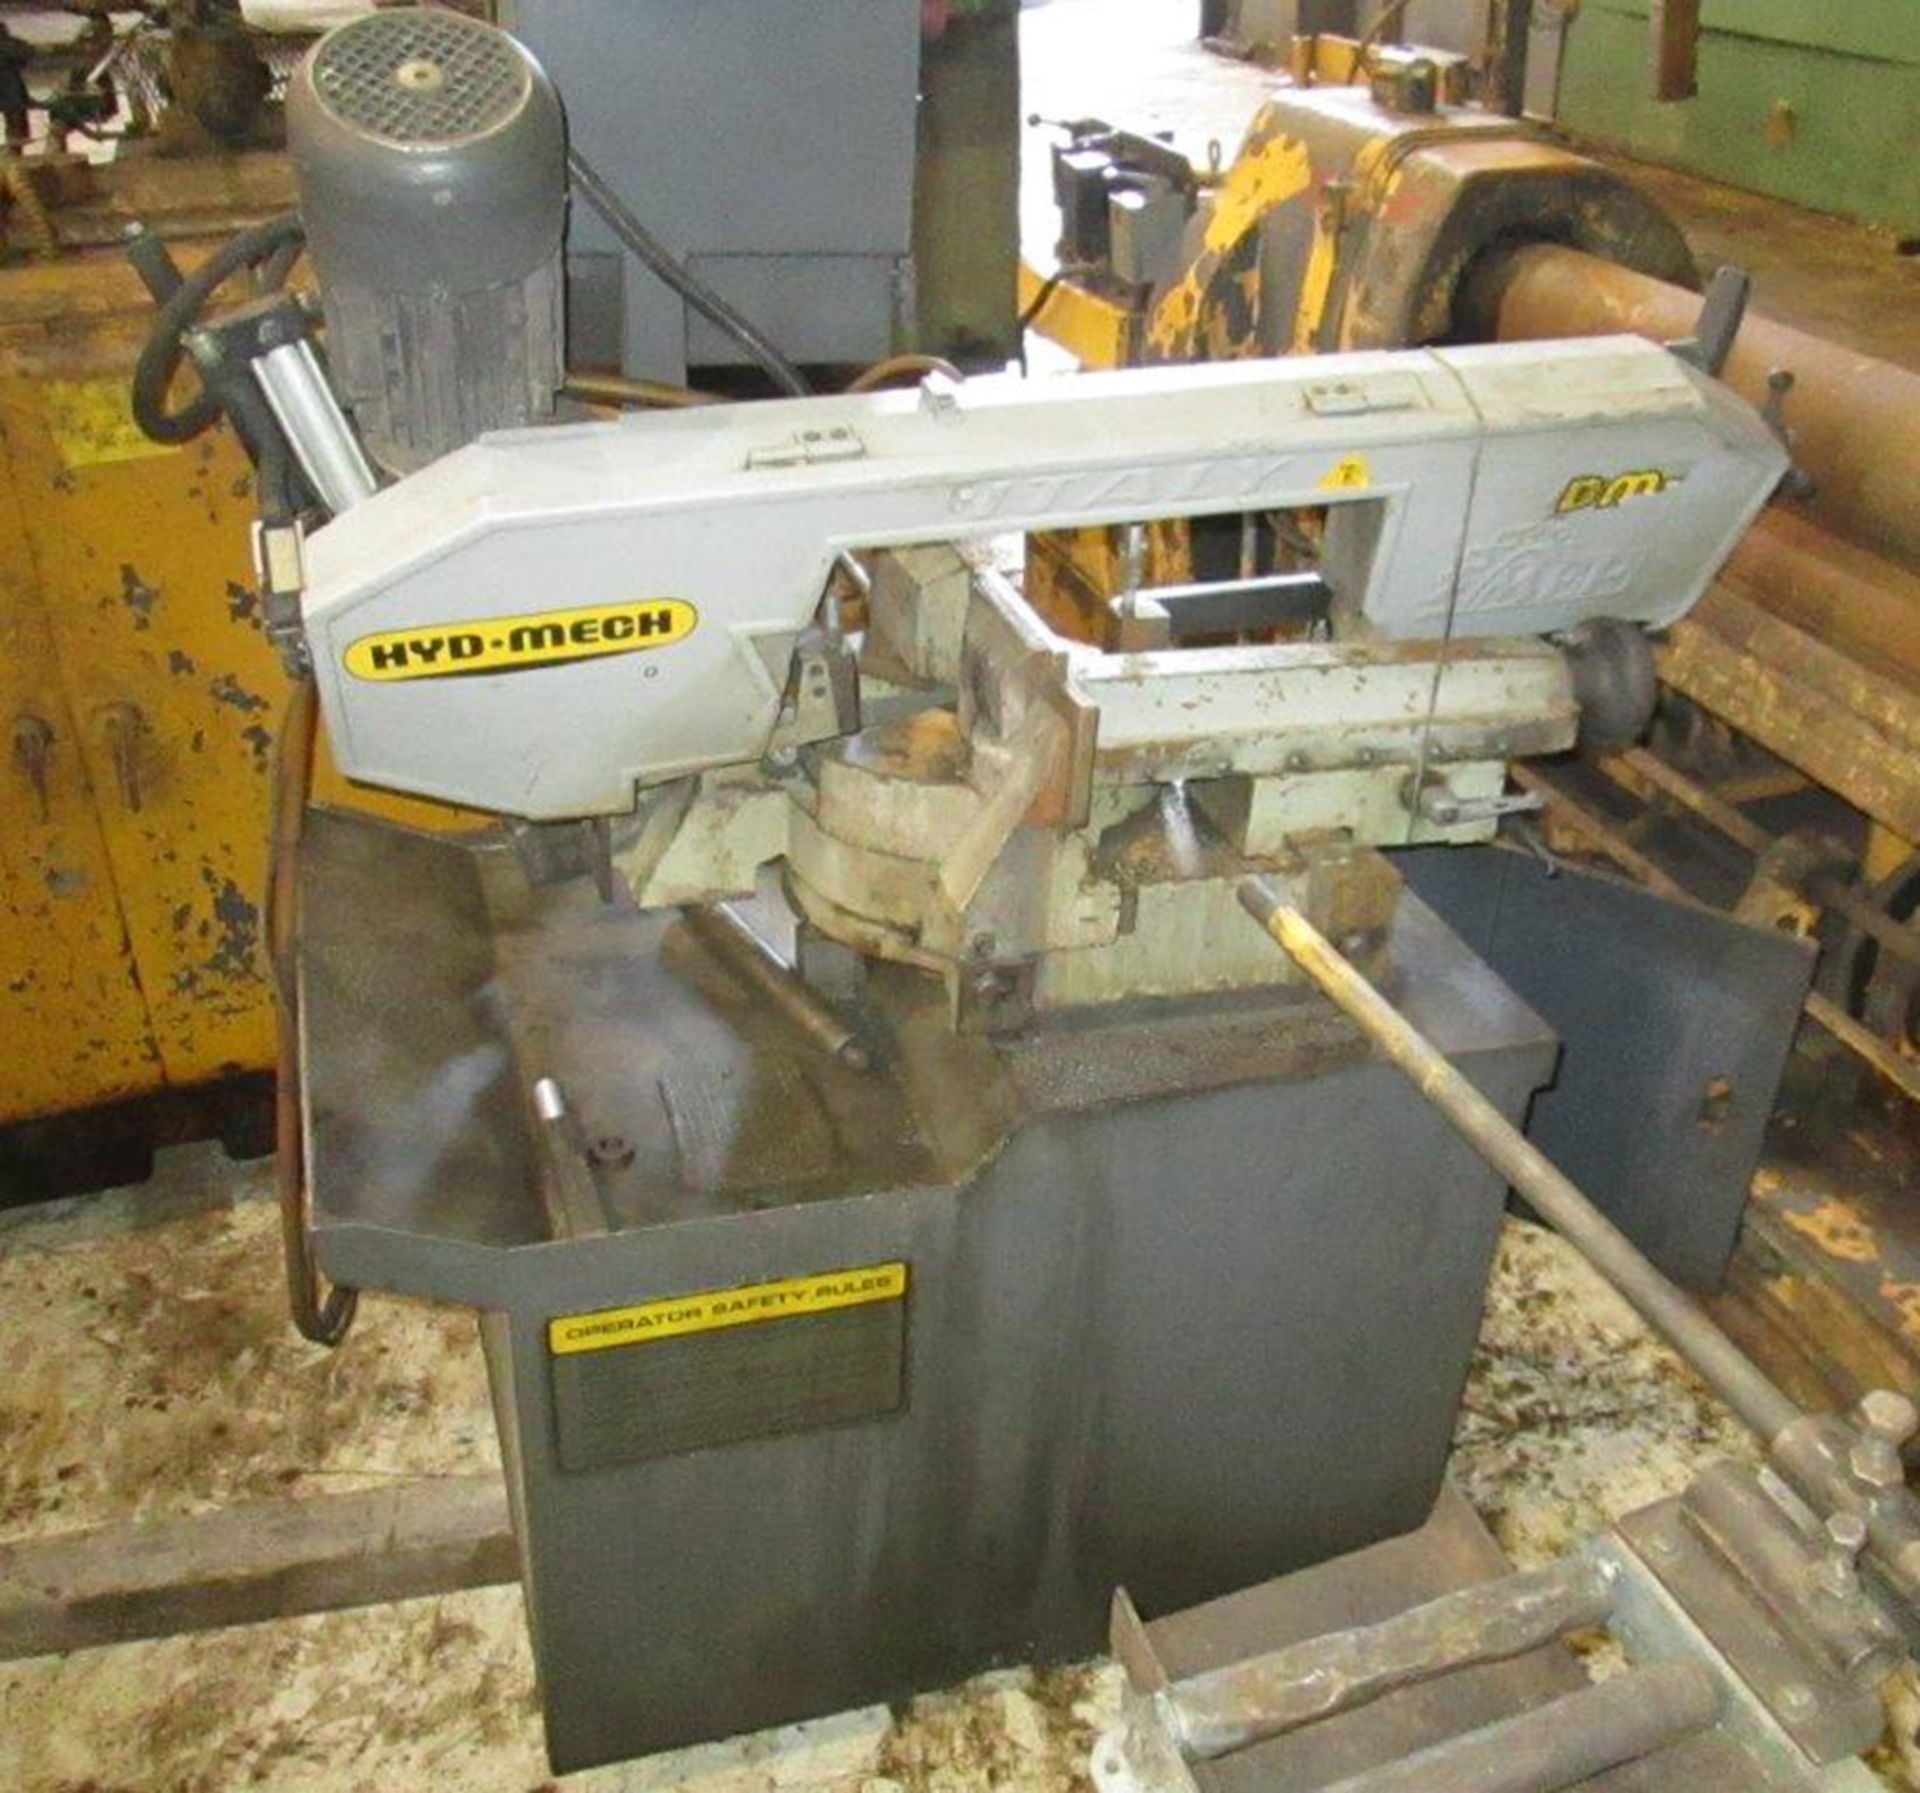 8" Round Hyd Mech DM8 Dbl. Miter Horiz. Metal Cutting Bandsaw - Located In: Huntington Park, CA - Image 2 of 3